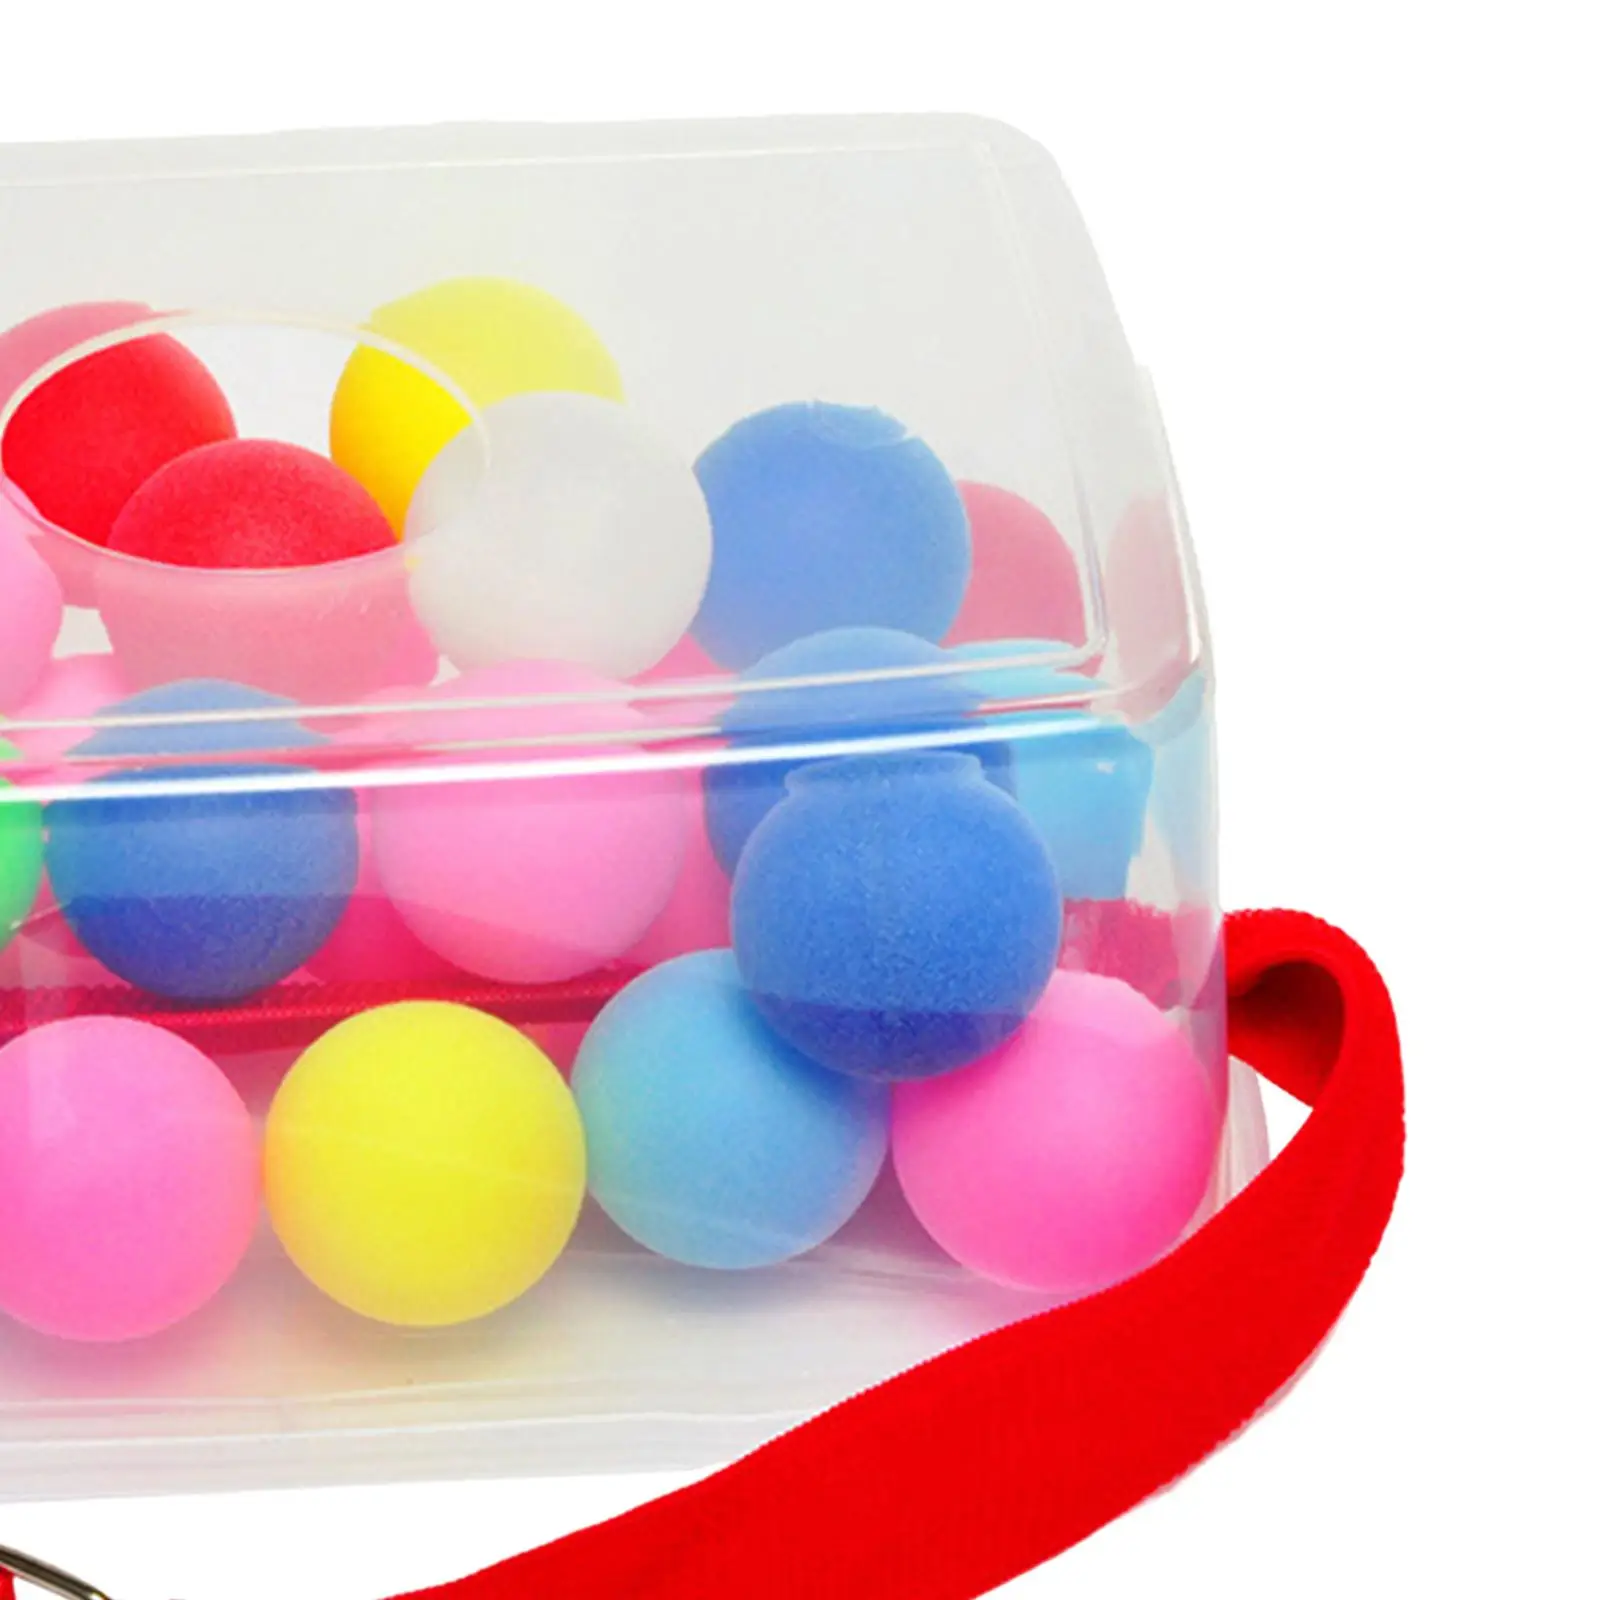 Fun Shaking Balls Game Box Birthday Gifts with 30 Balls SHAKE Balls Out Swing Balls Toys Lawn Games for party kid